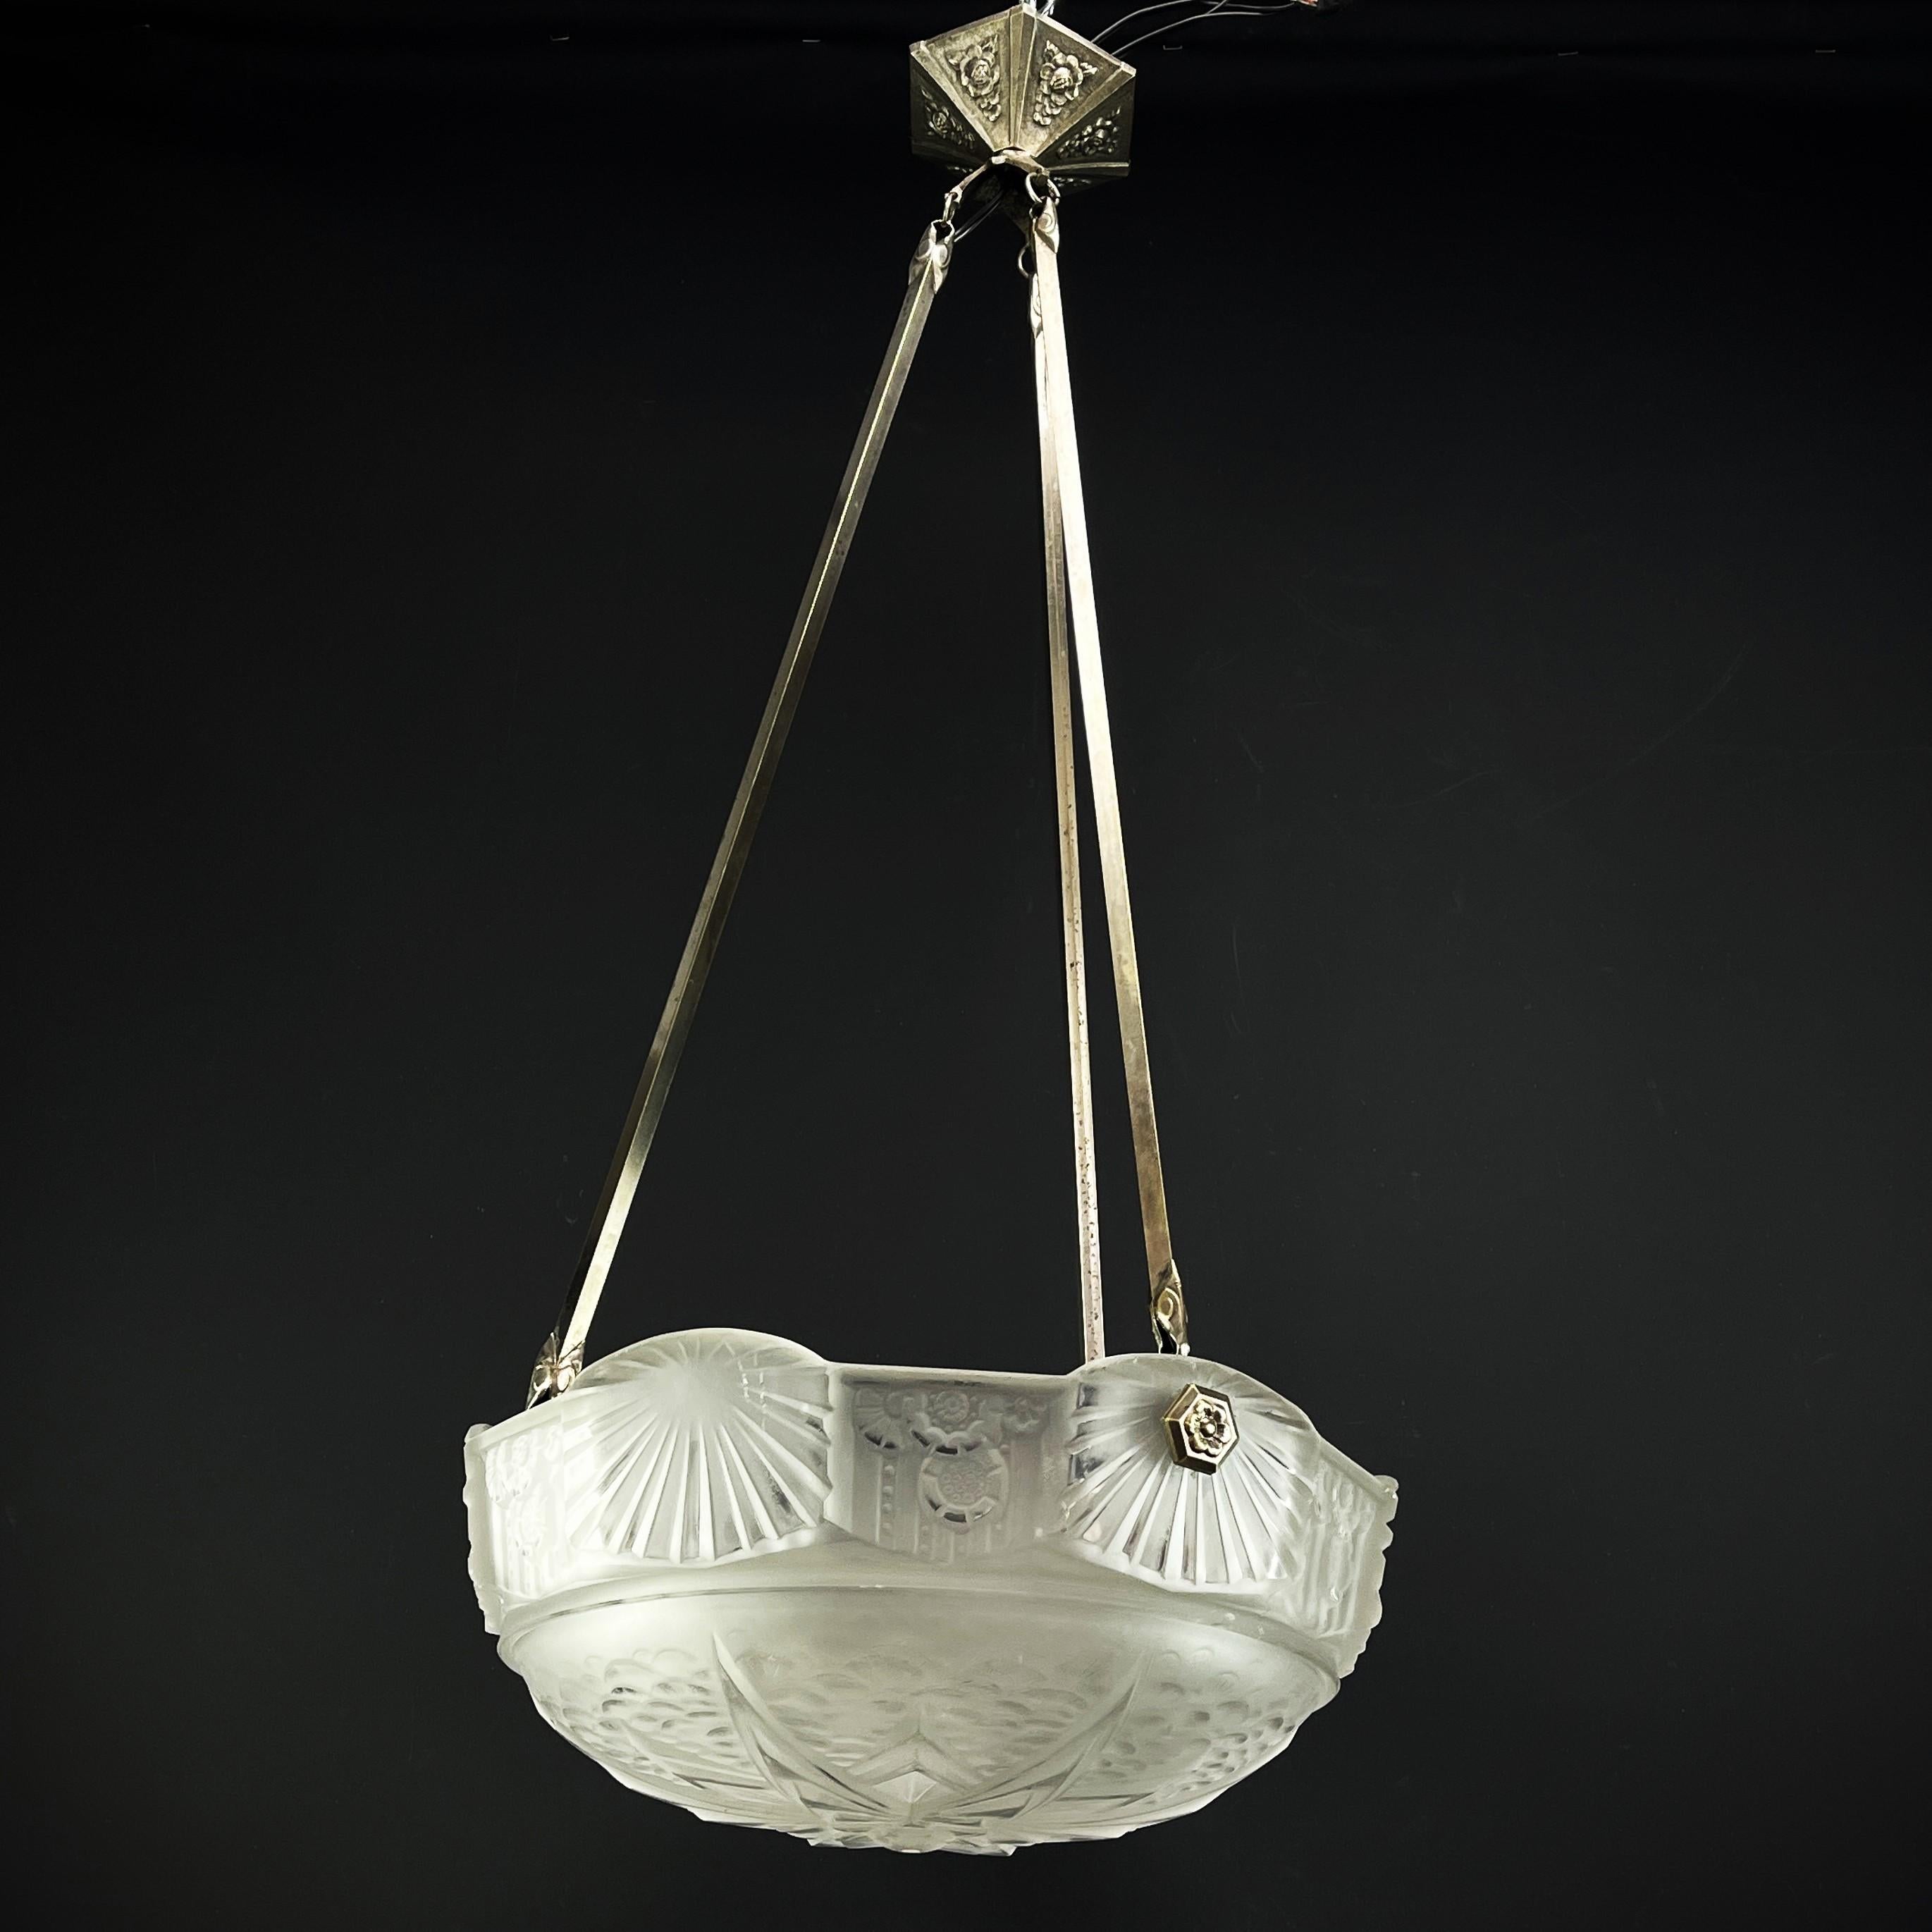 Art Deco lamp by Muller Frères Lunéville 

The ART DECO ceiling lamp is a remarkable example of early 20th century craftsmanship and style. 

The signature 